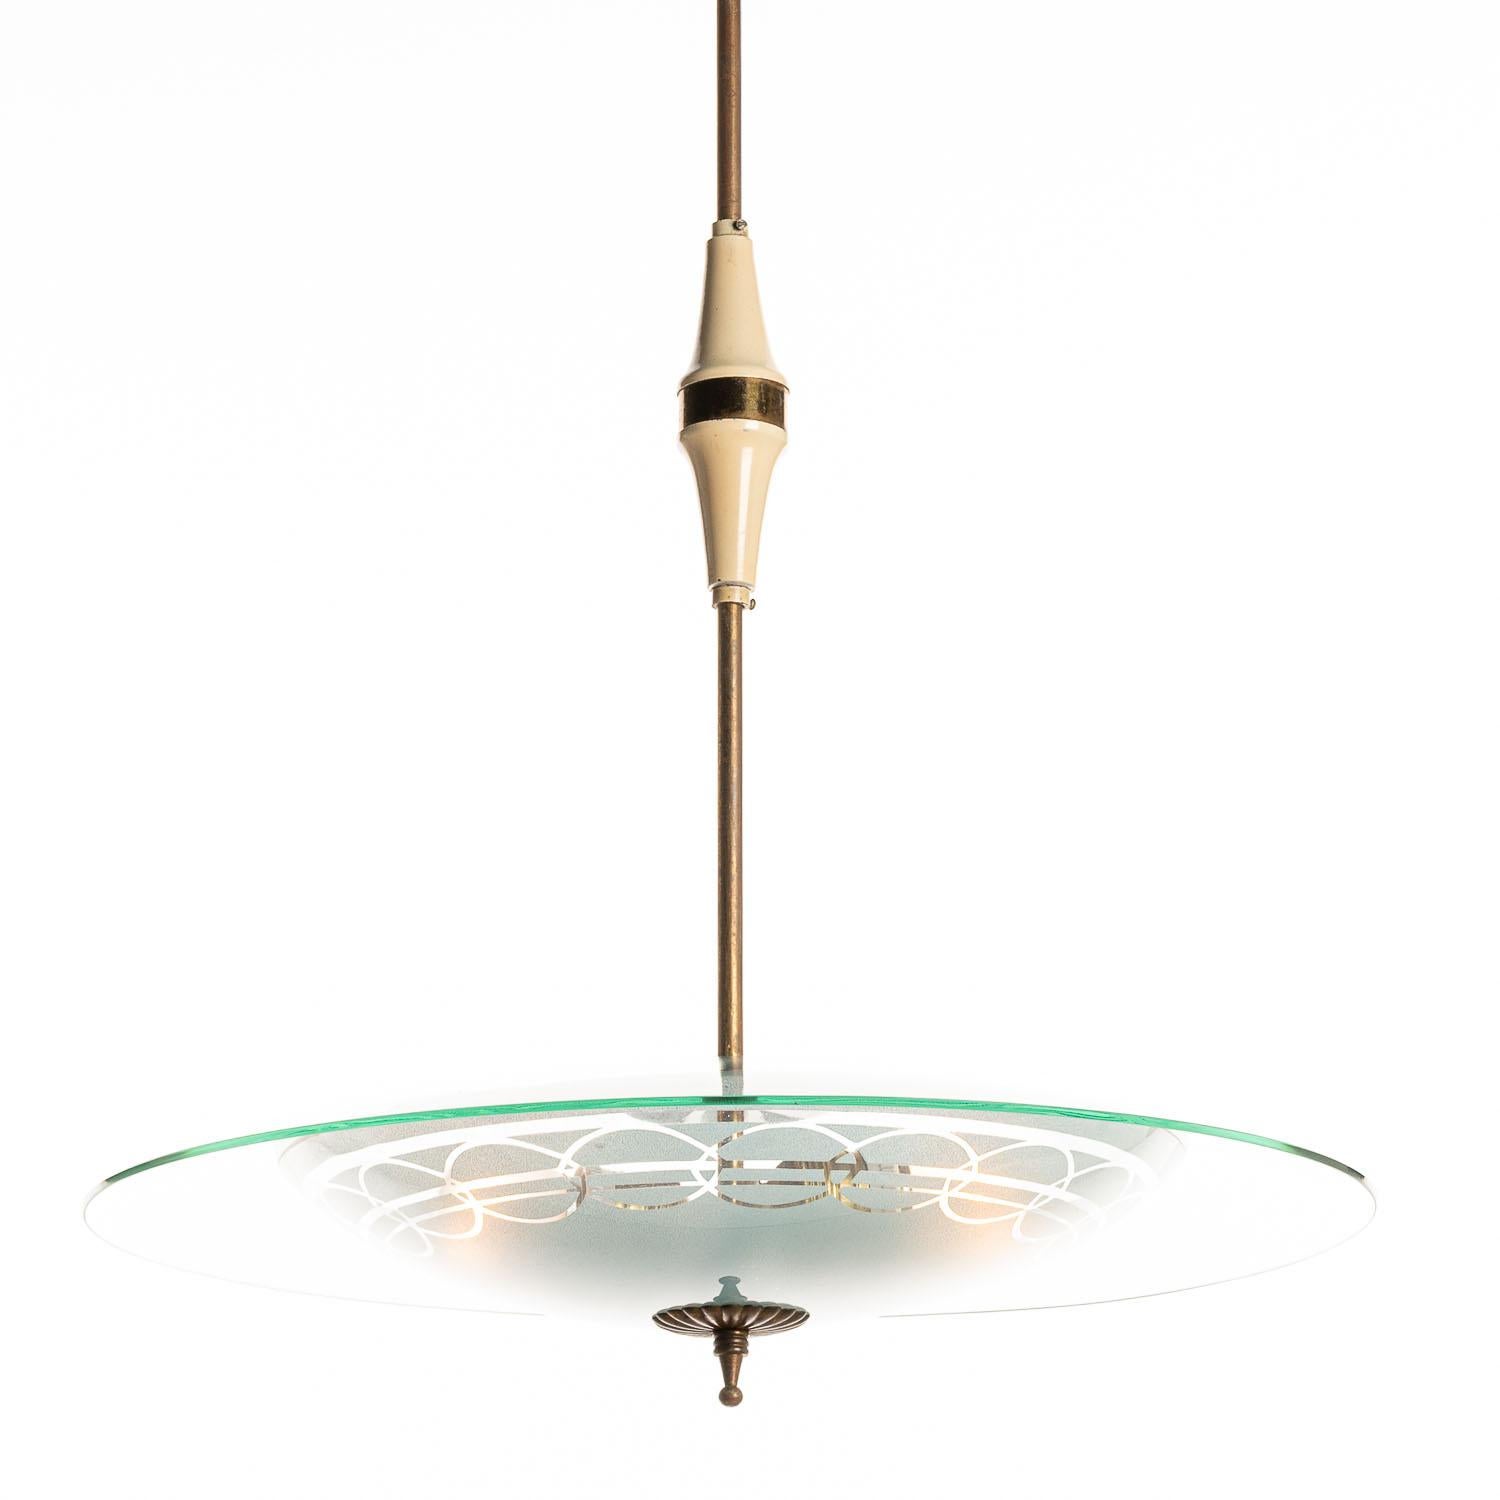 This 1950s piece is attributed to designer Pietro Chiesa. Classic yet understated in design, it certainly brings a lot of charm. The soft-blueish tones add a unique touch to the lamp, together with the clear glass top plate. The brass rod is muted